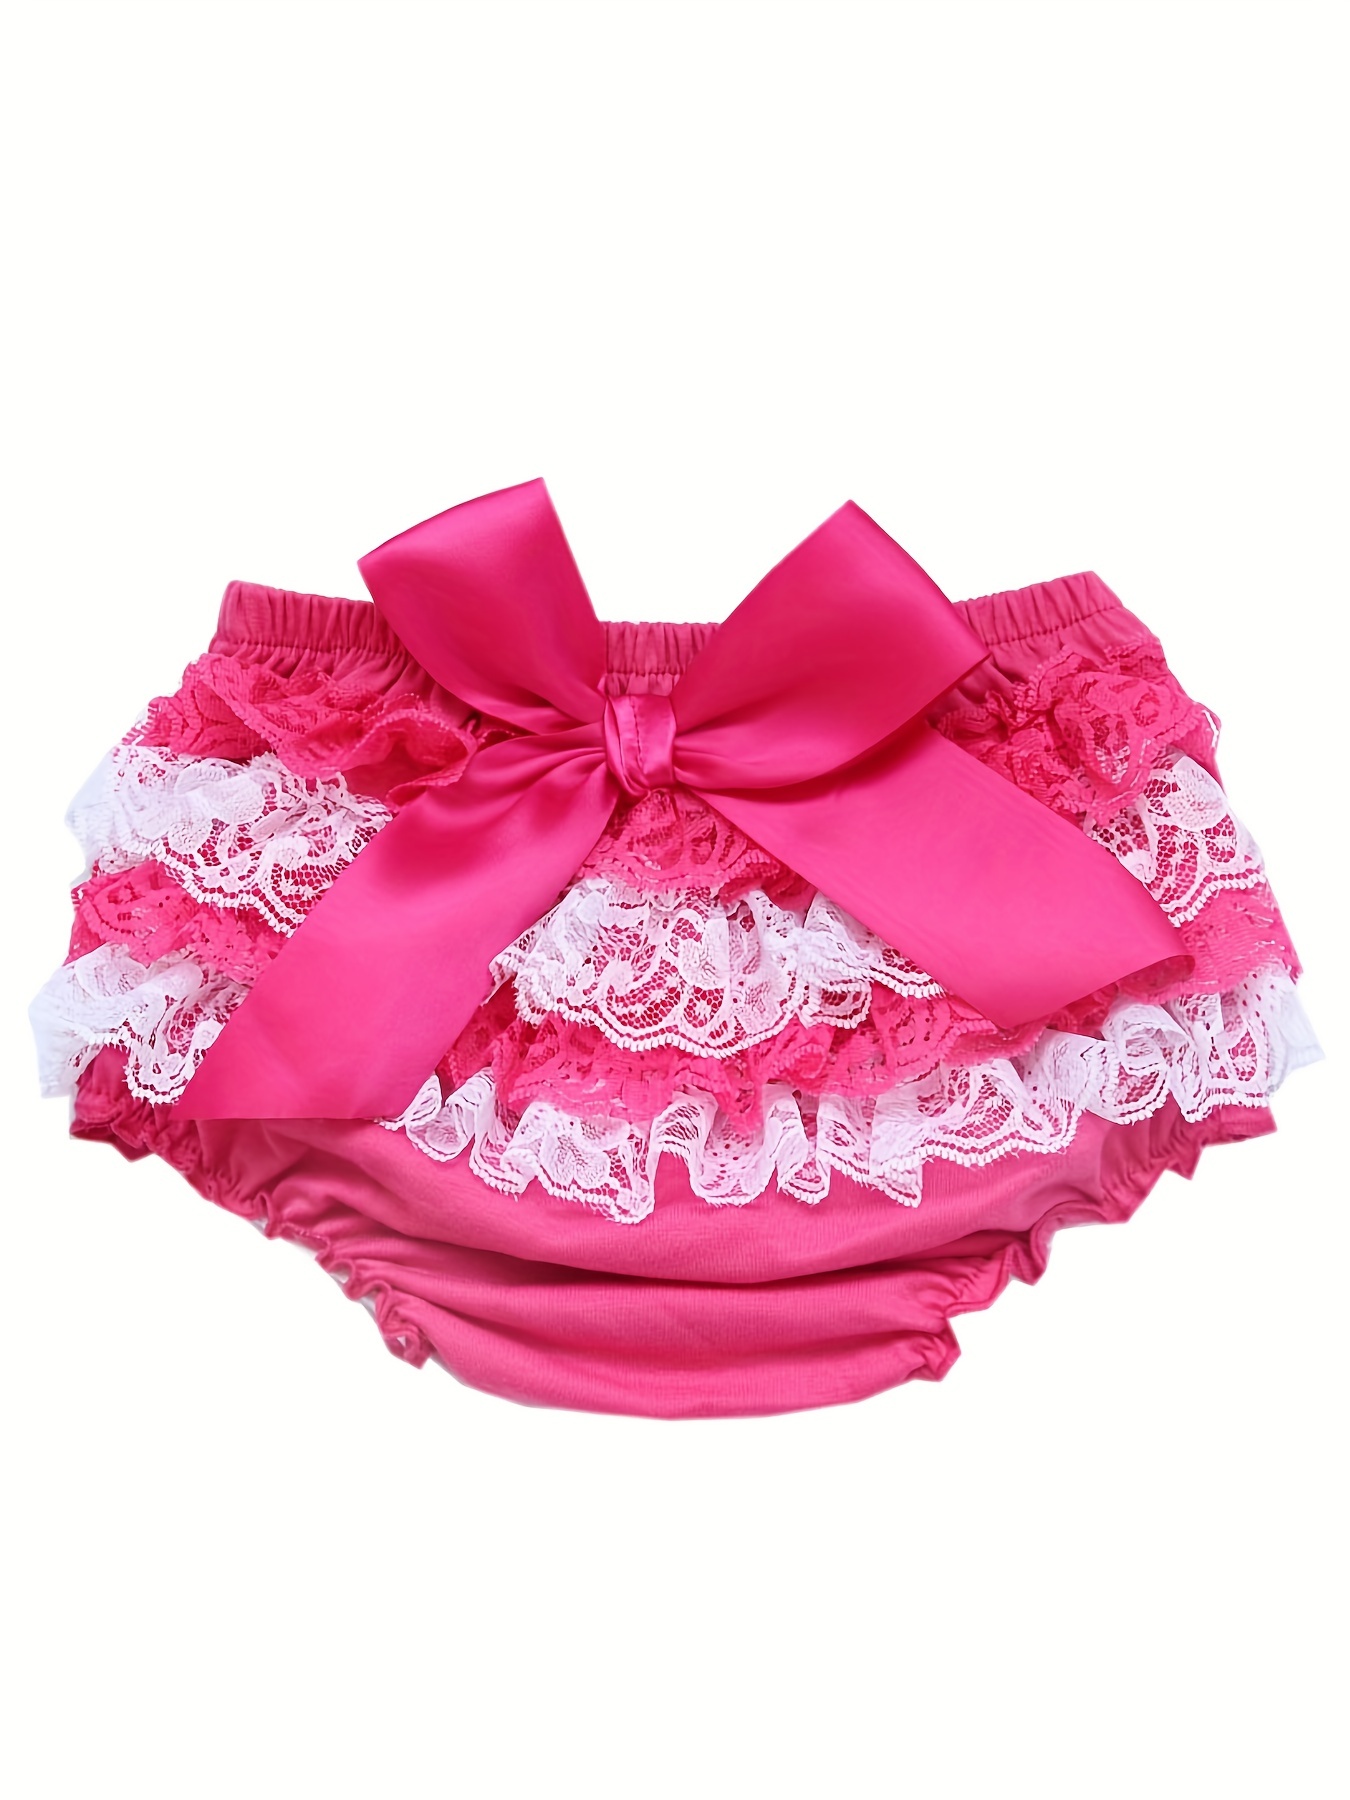 Baby Girls Pink Frilly Lace Satin Pants Over Nappy Knickers